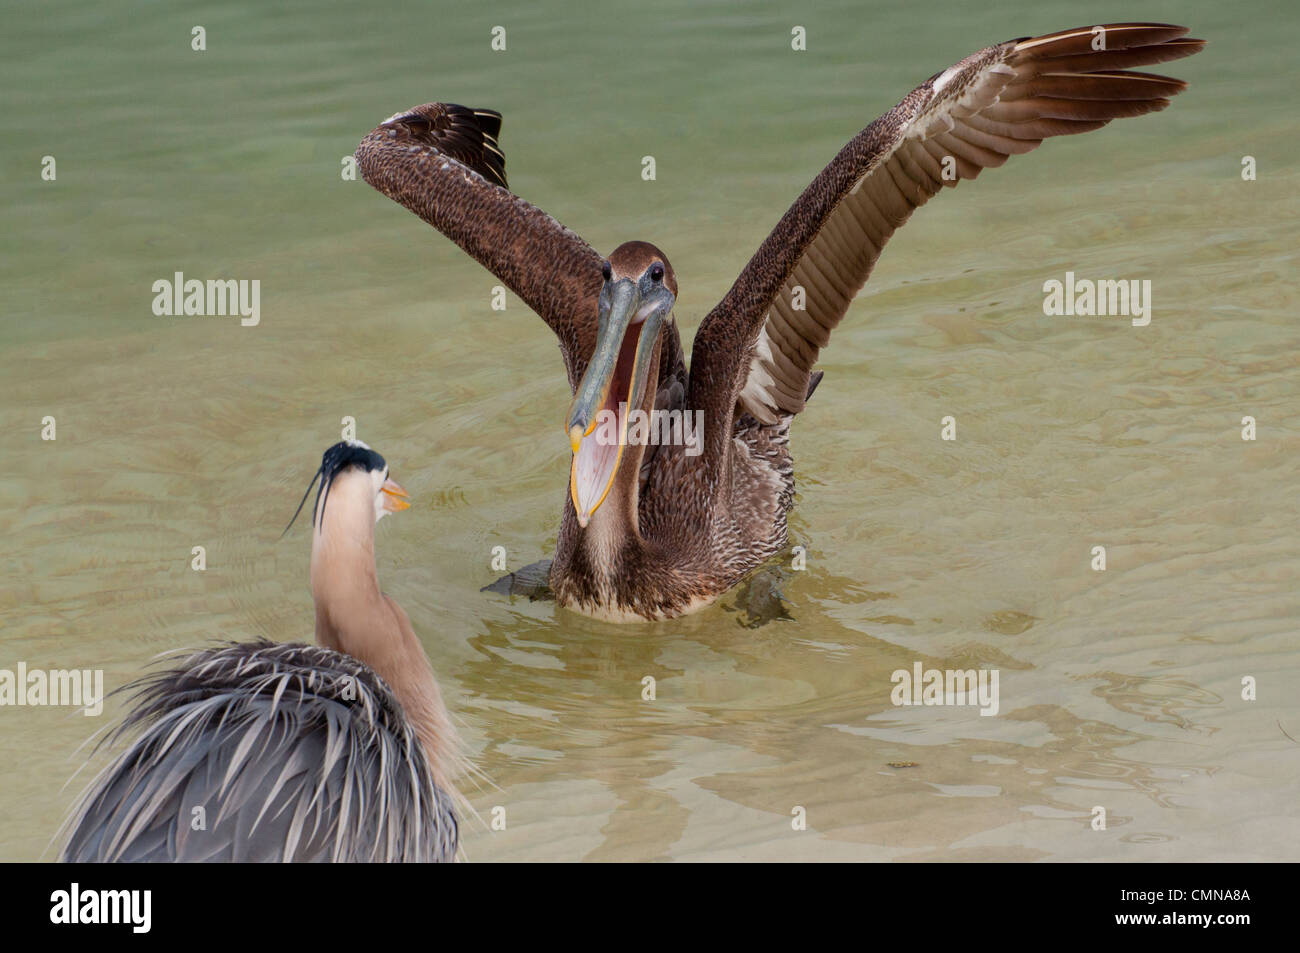 An immature Pelican confronting a Great Blue heron. Stock Photo